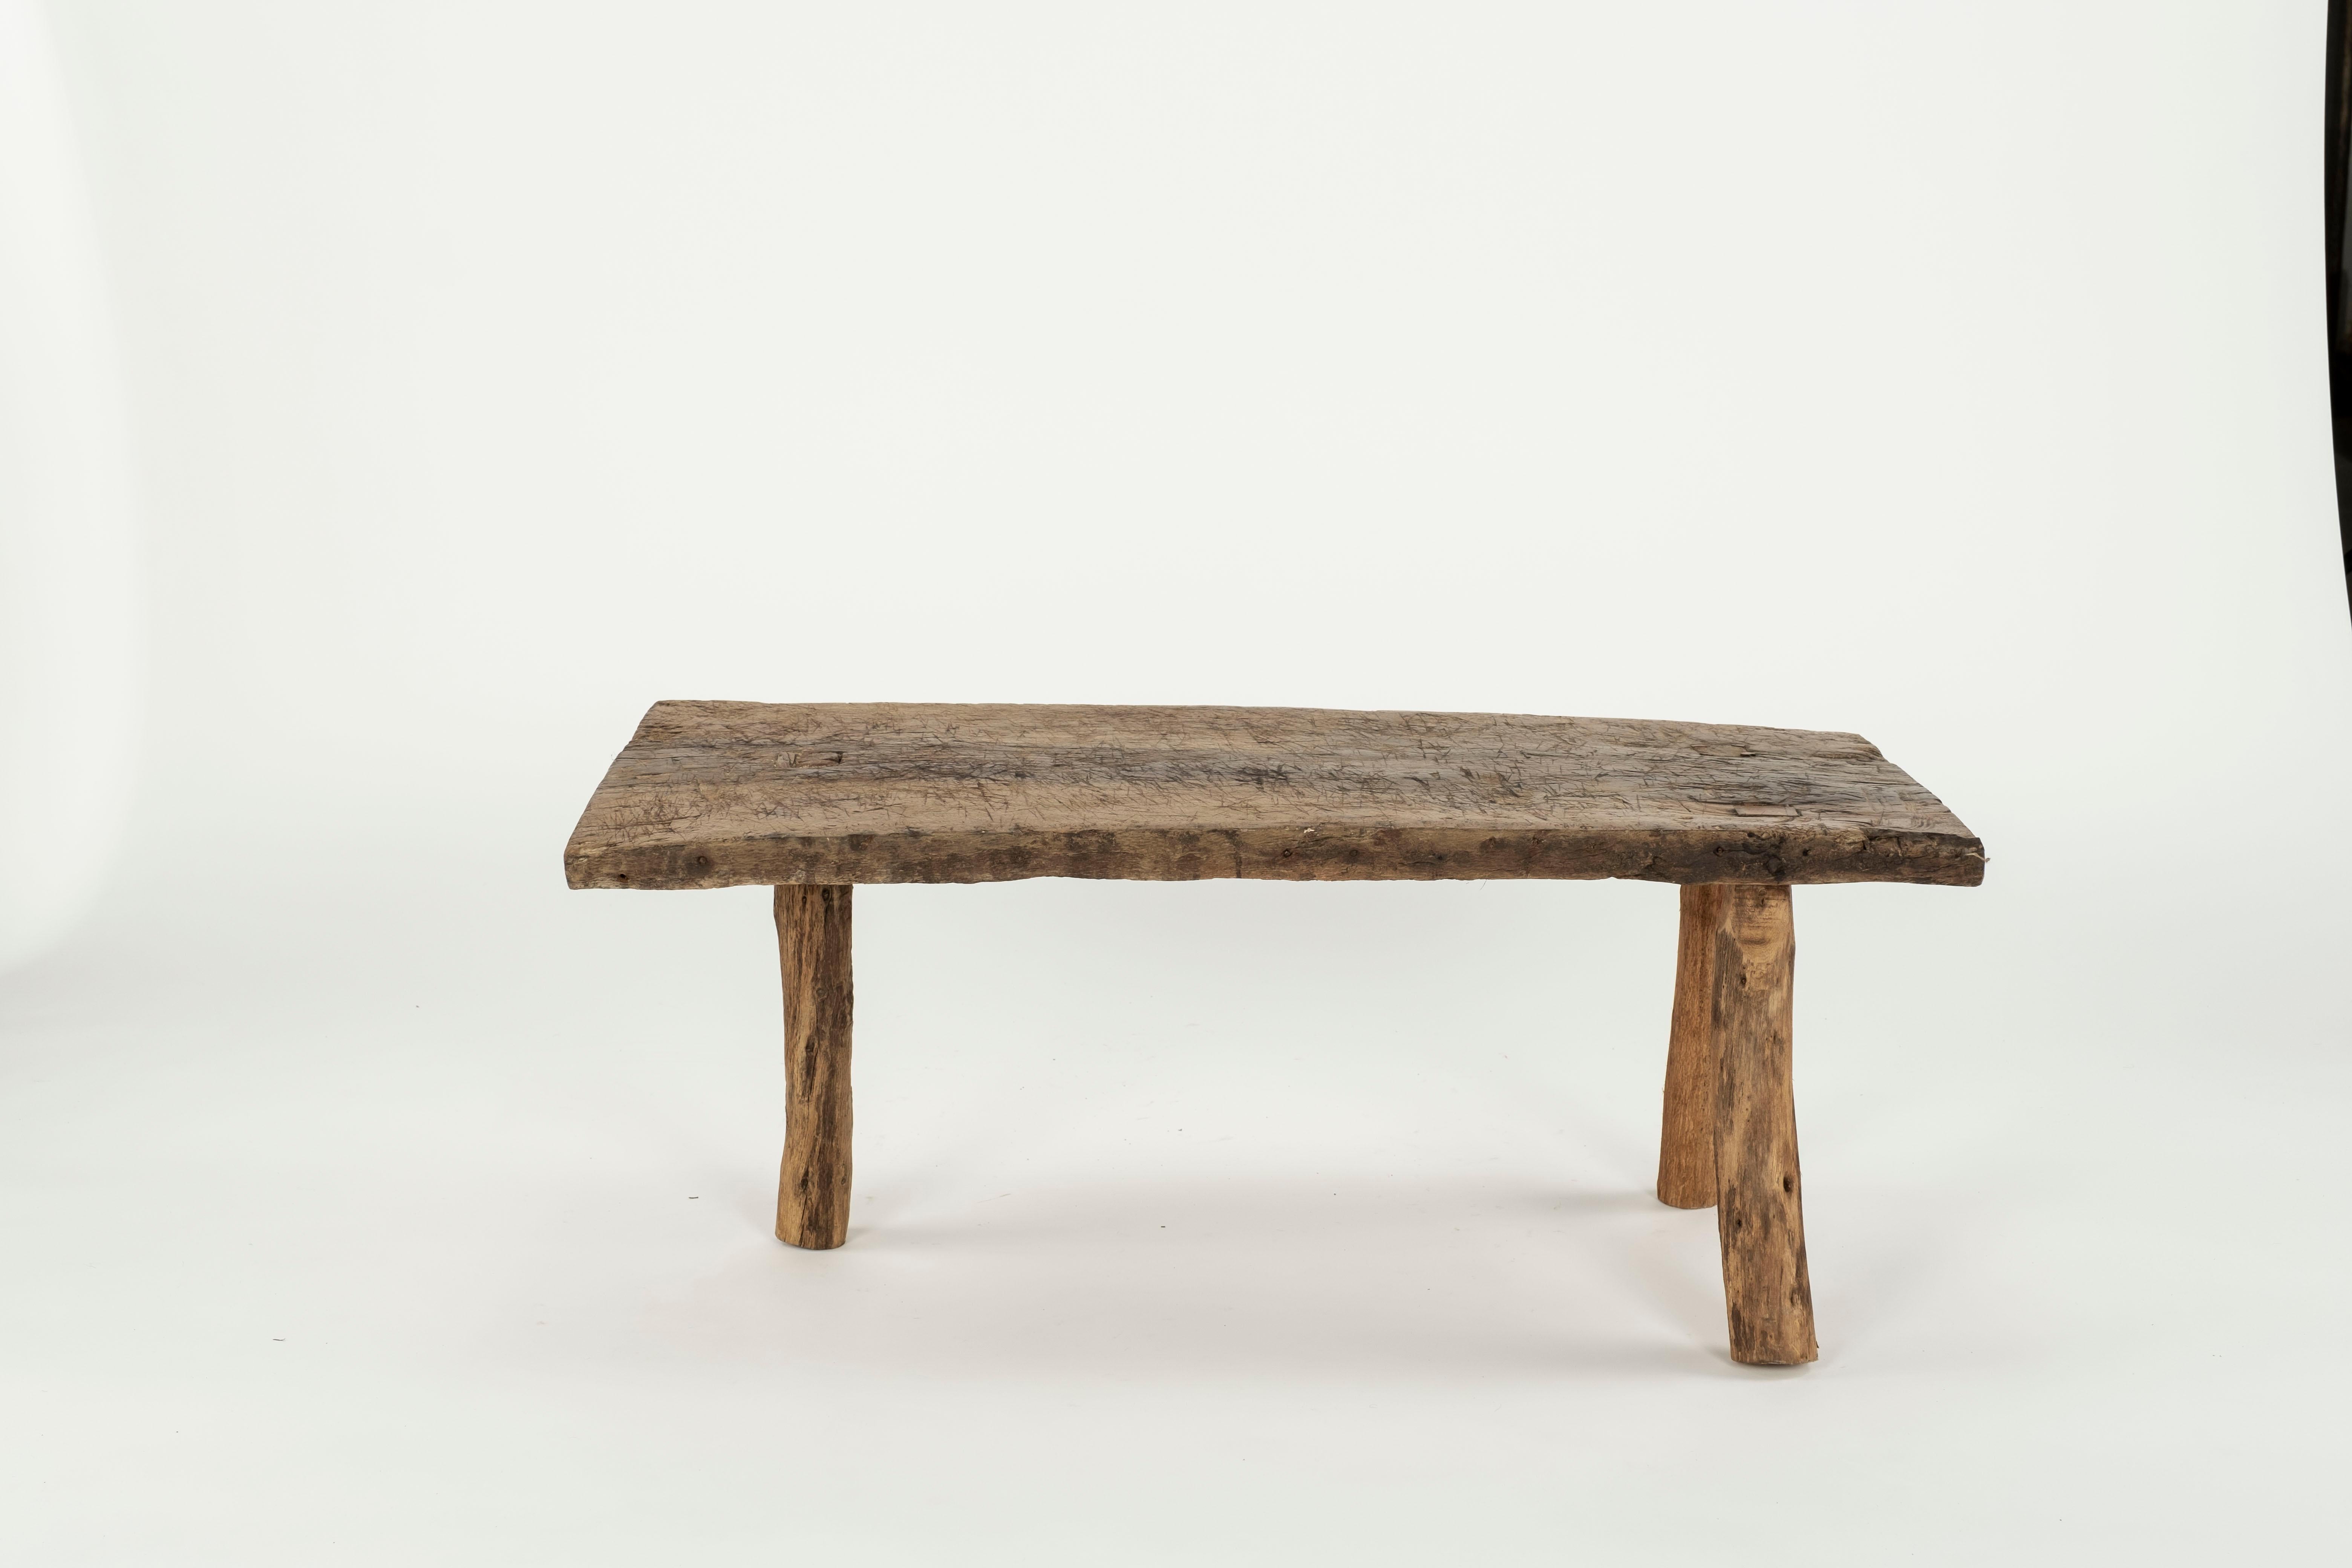  Primitive Pig Bench from the North of England with 3 legs and solid plank top.  